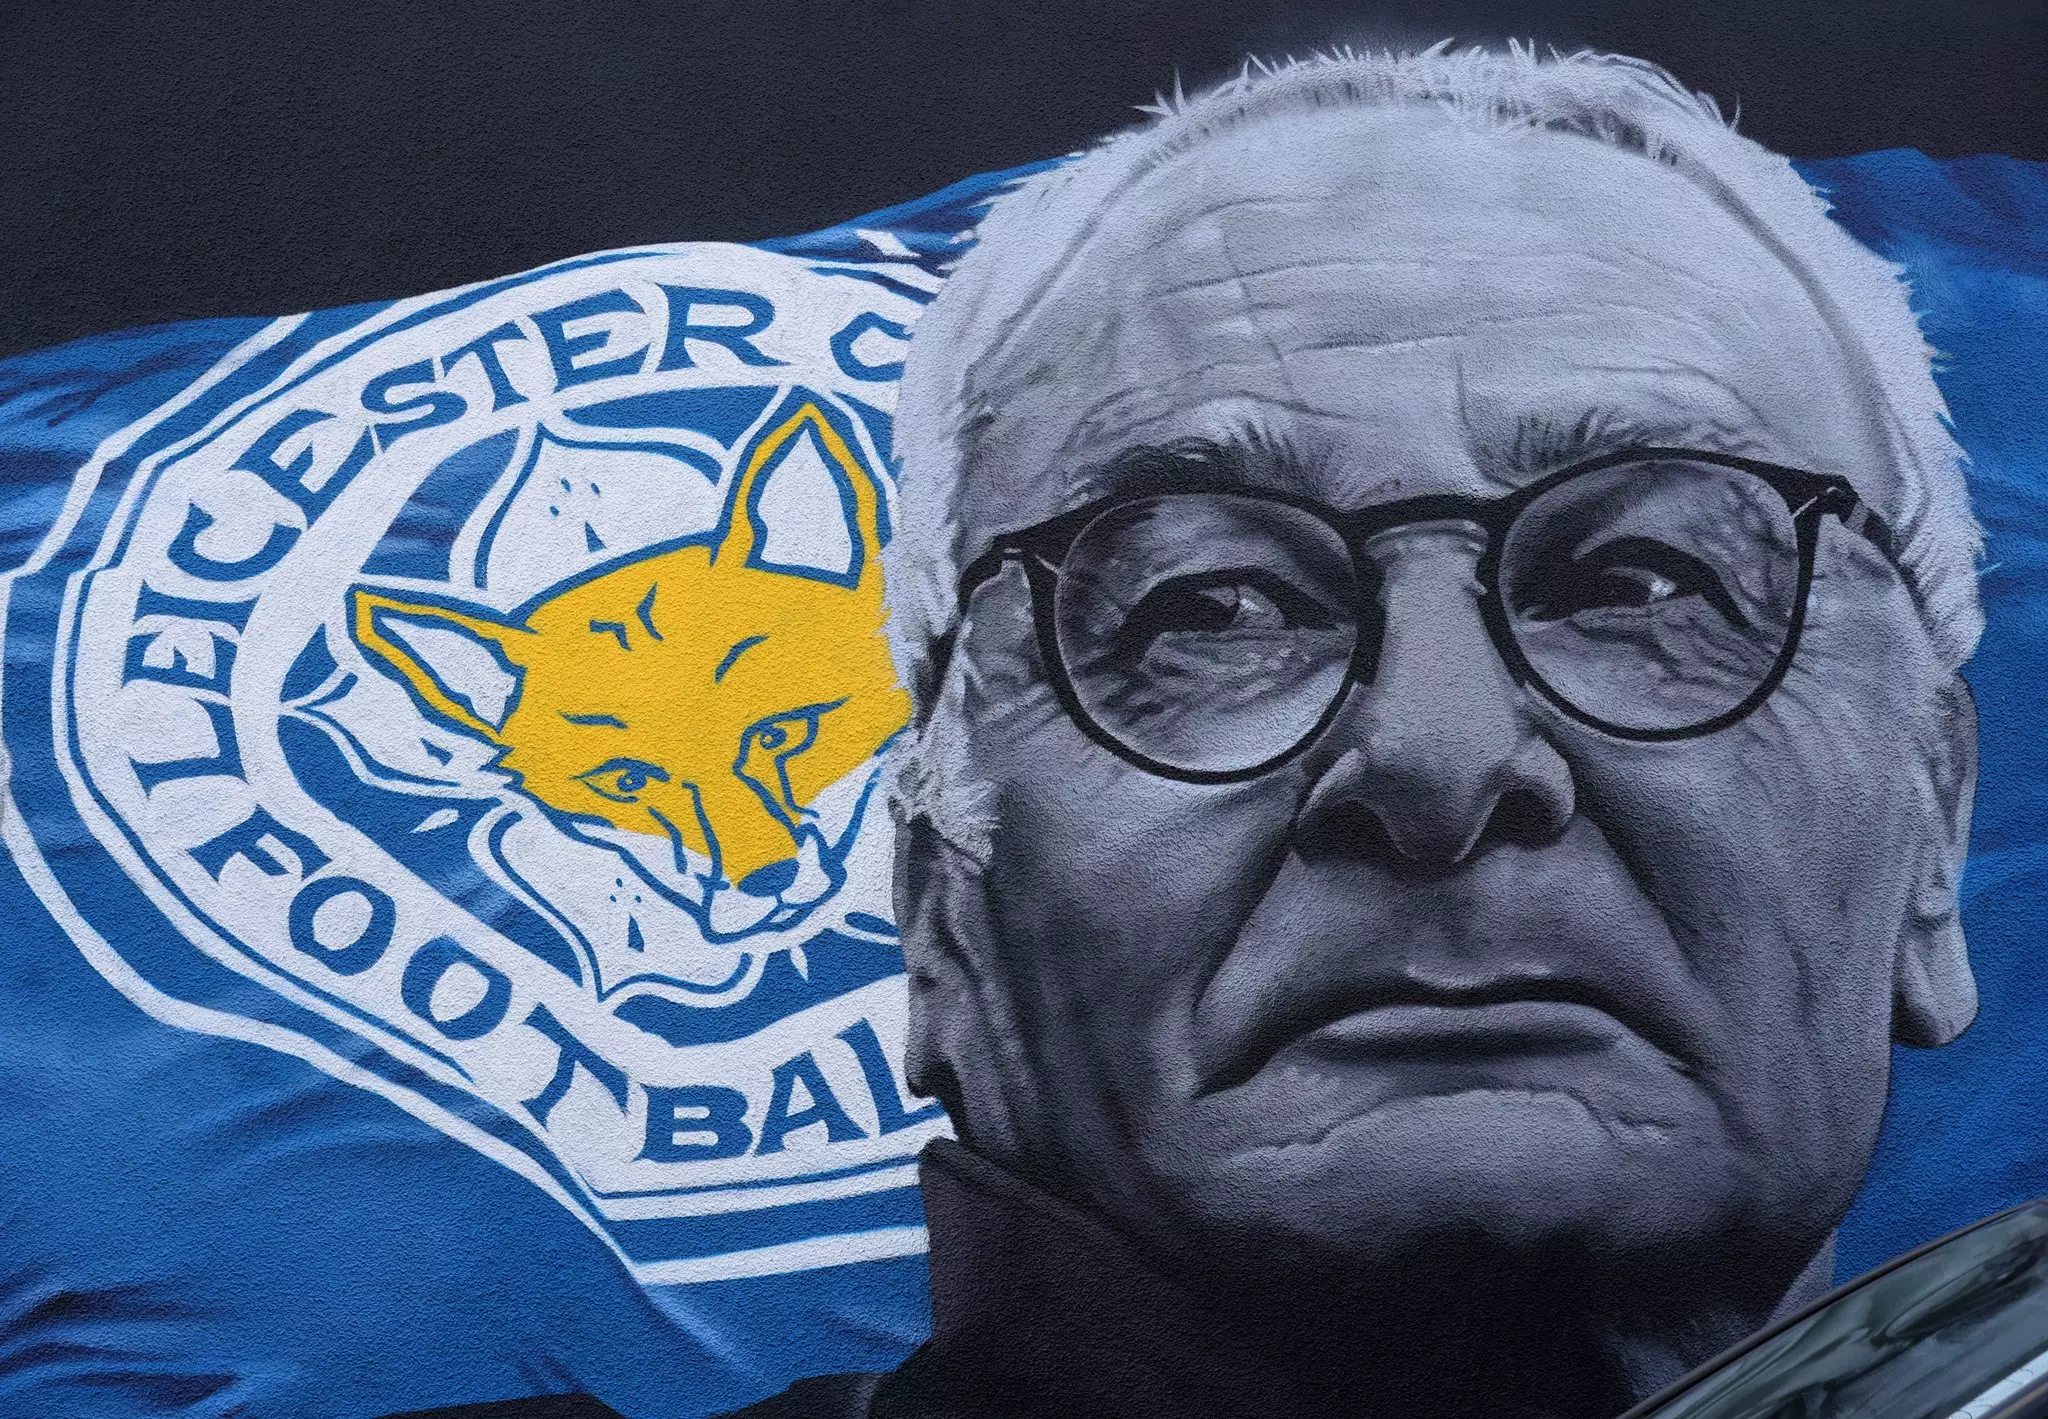 Claudio Ranieri To Be Rewarded With Honour In His Hometown Of Rome